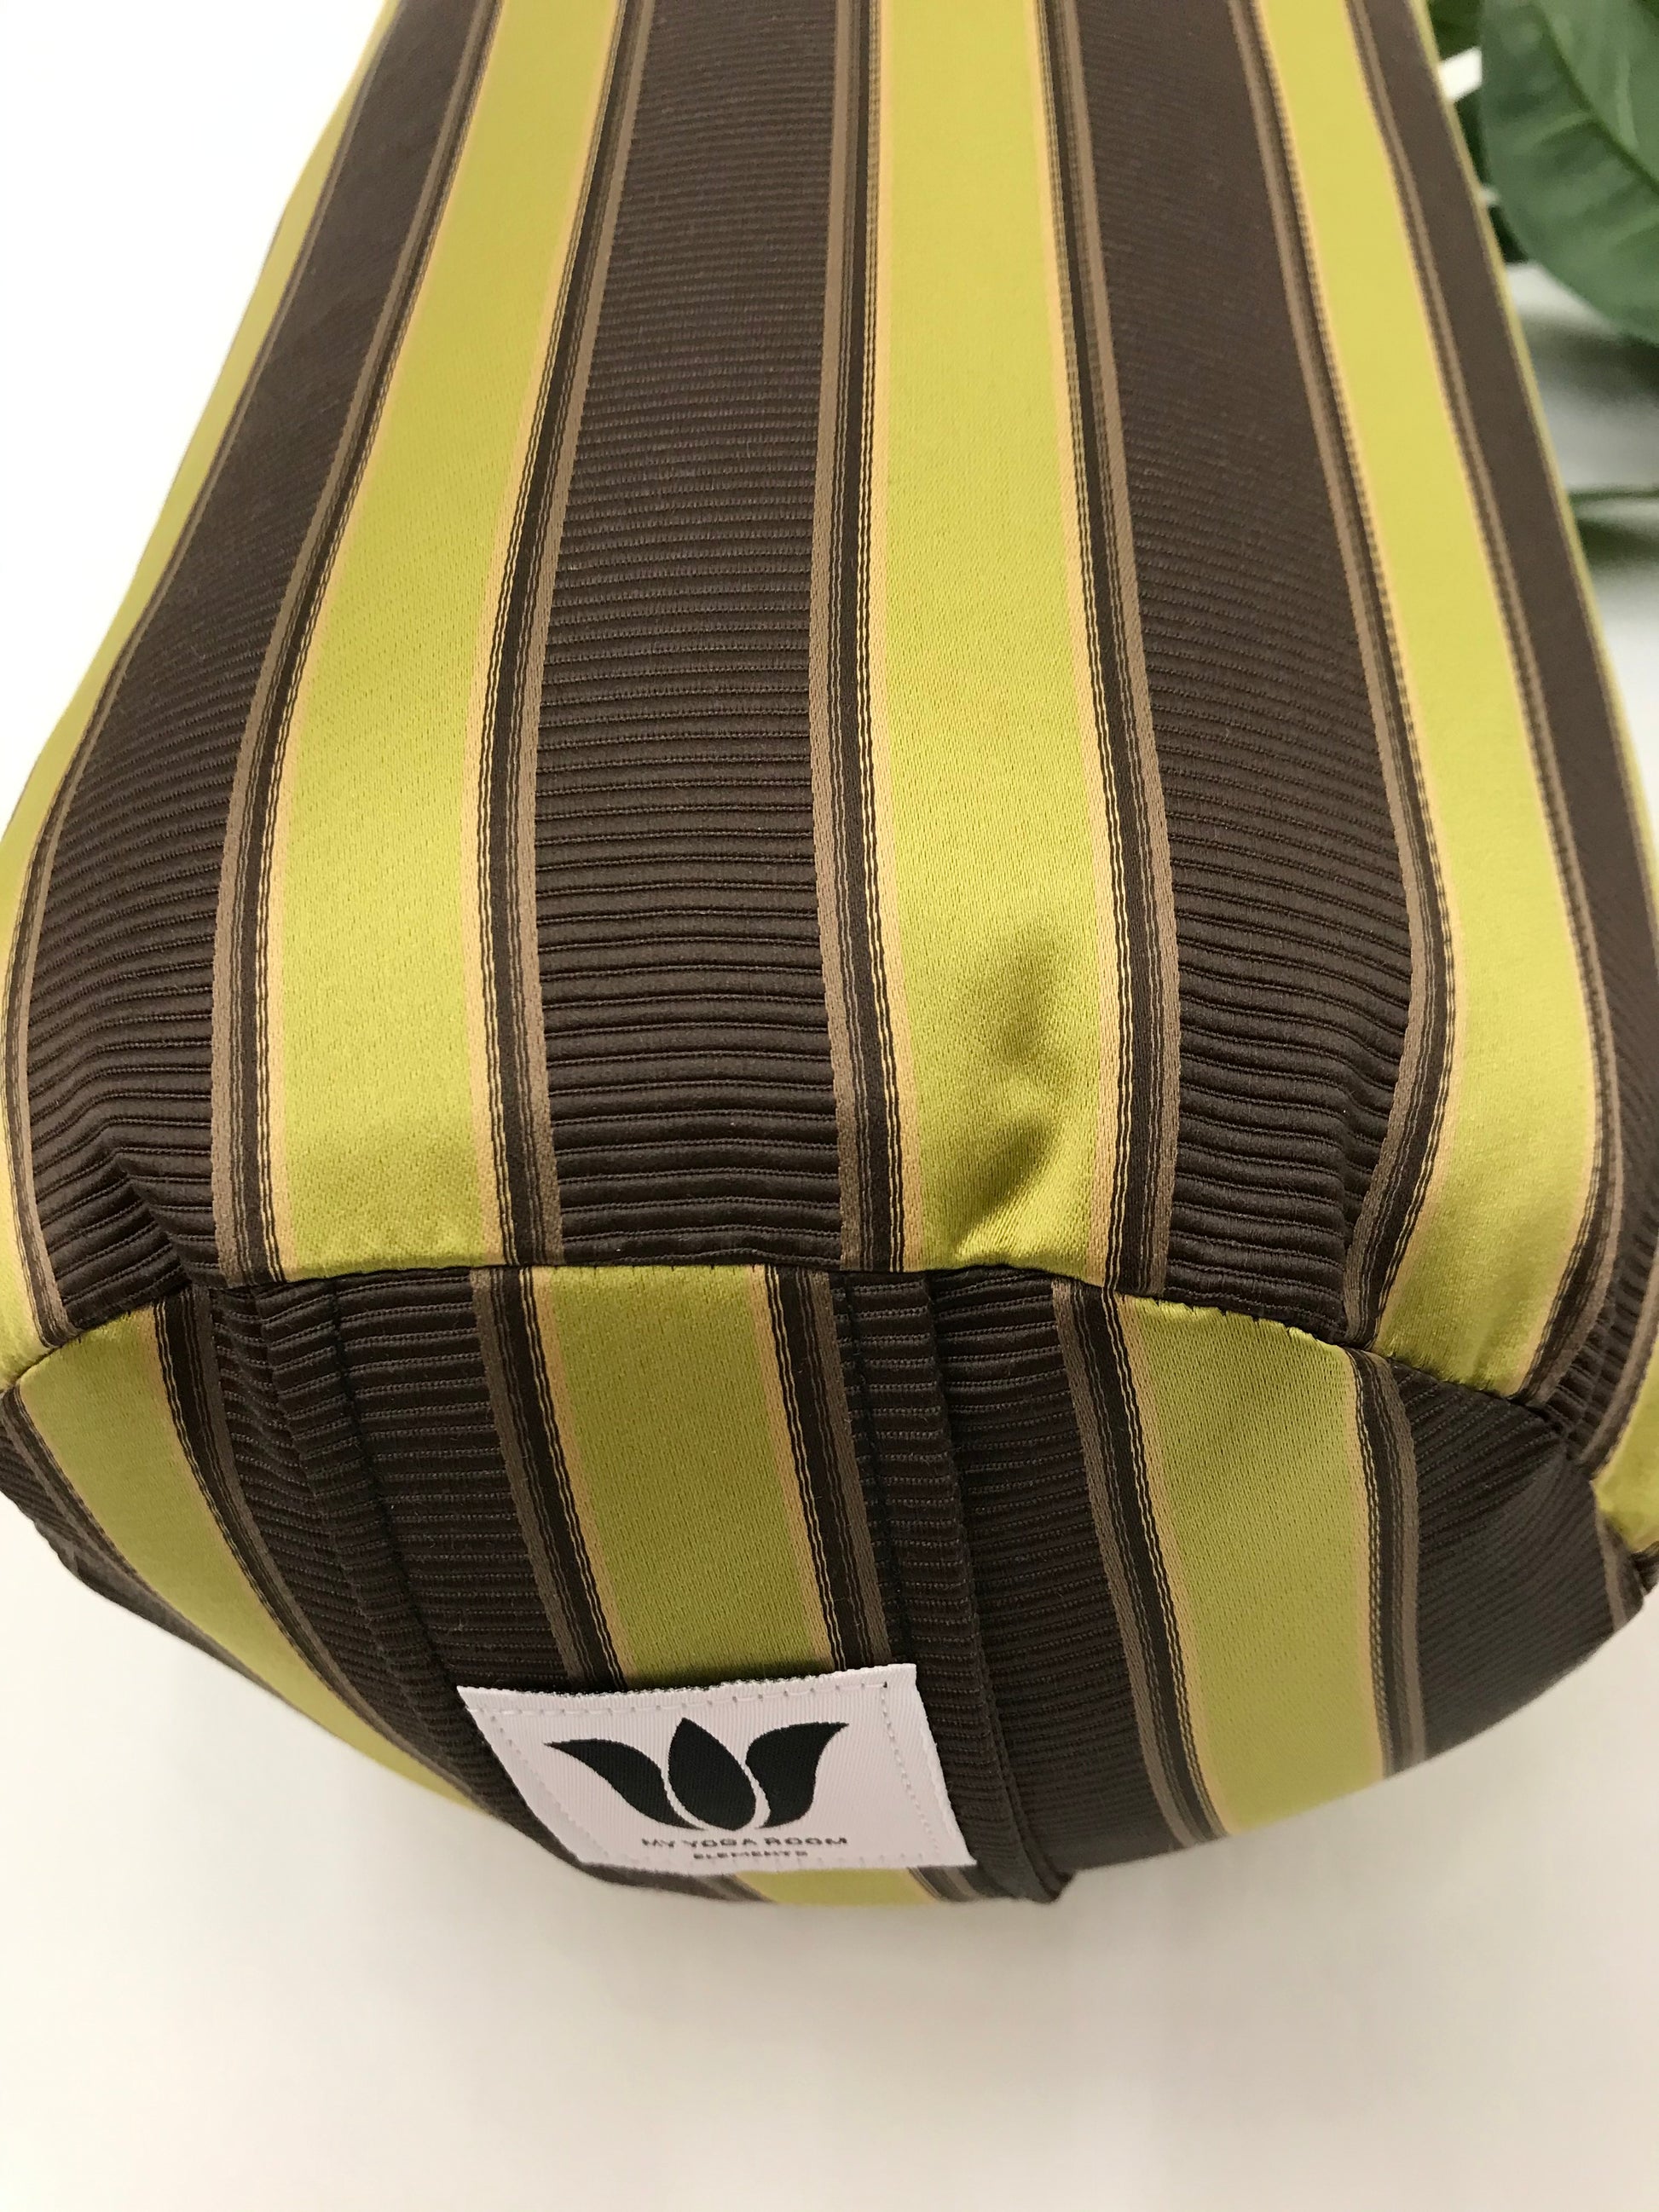 Round yoga bolster in durable sateen , eggplant coloured wide stripe fabric. Allergy conscious fill with removeable cover. Made in Canada by My Yoga Room Elements